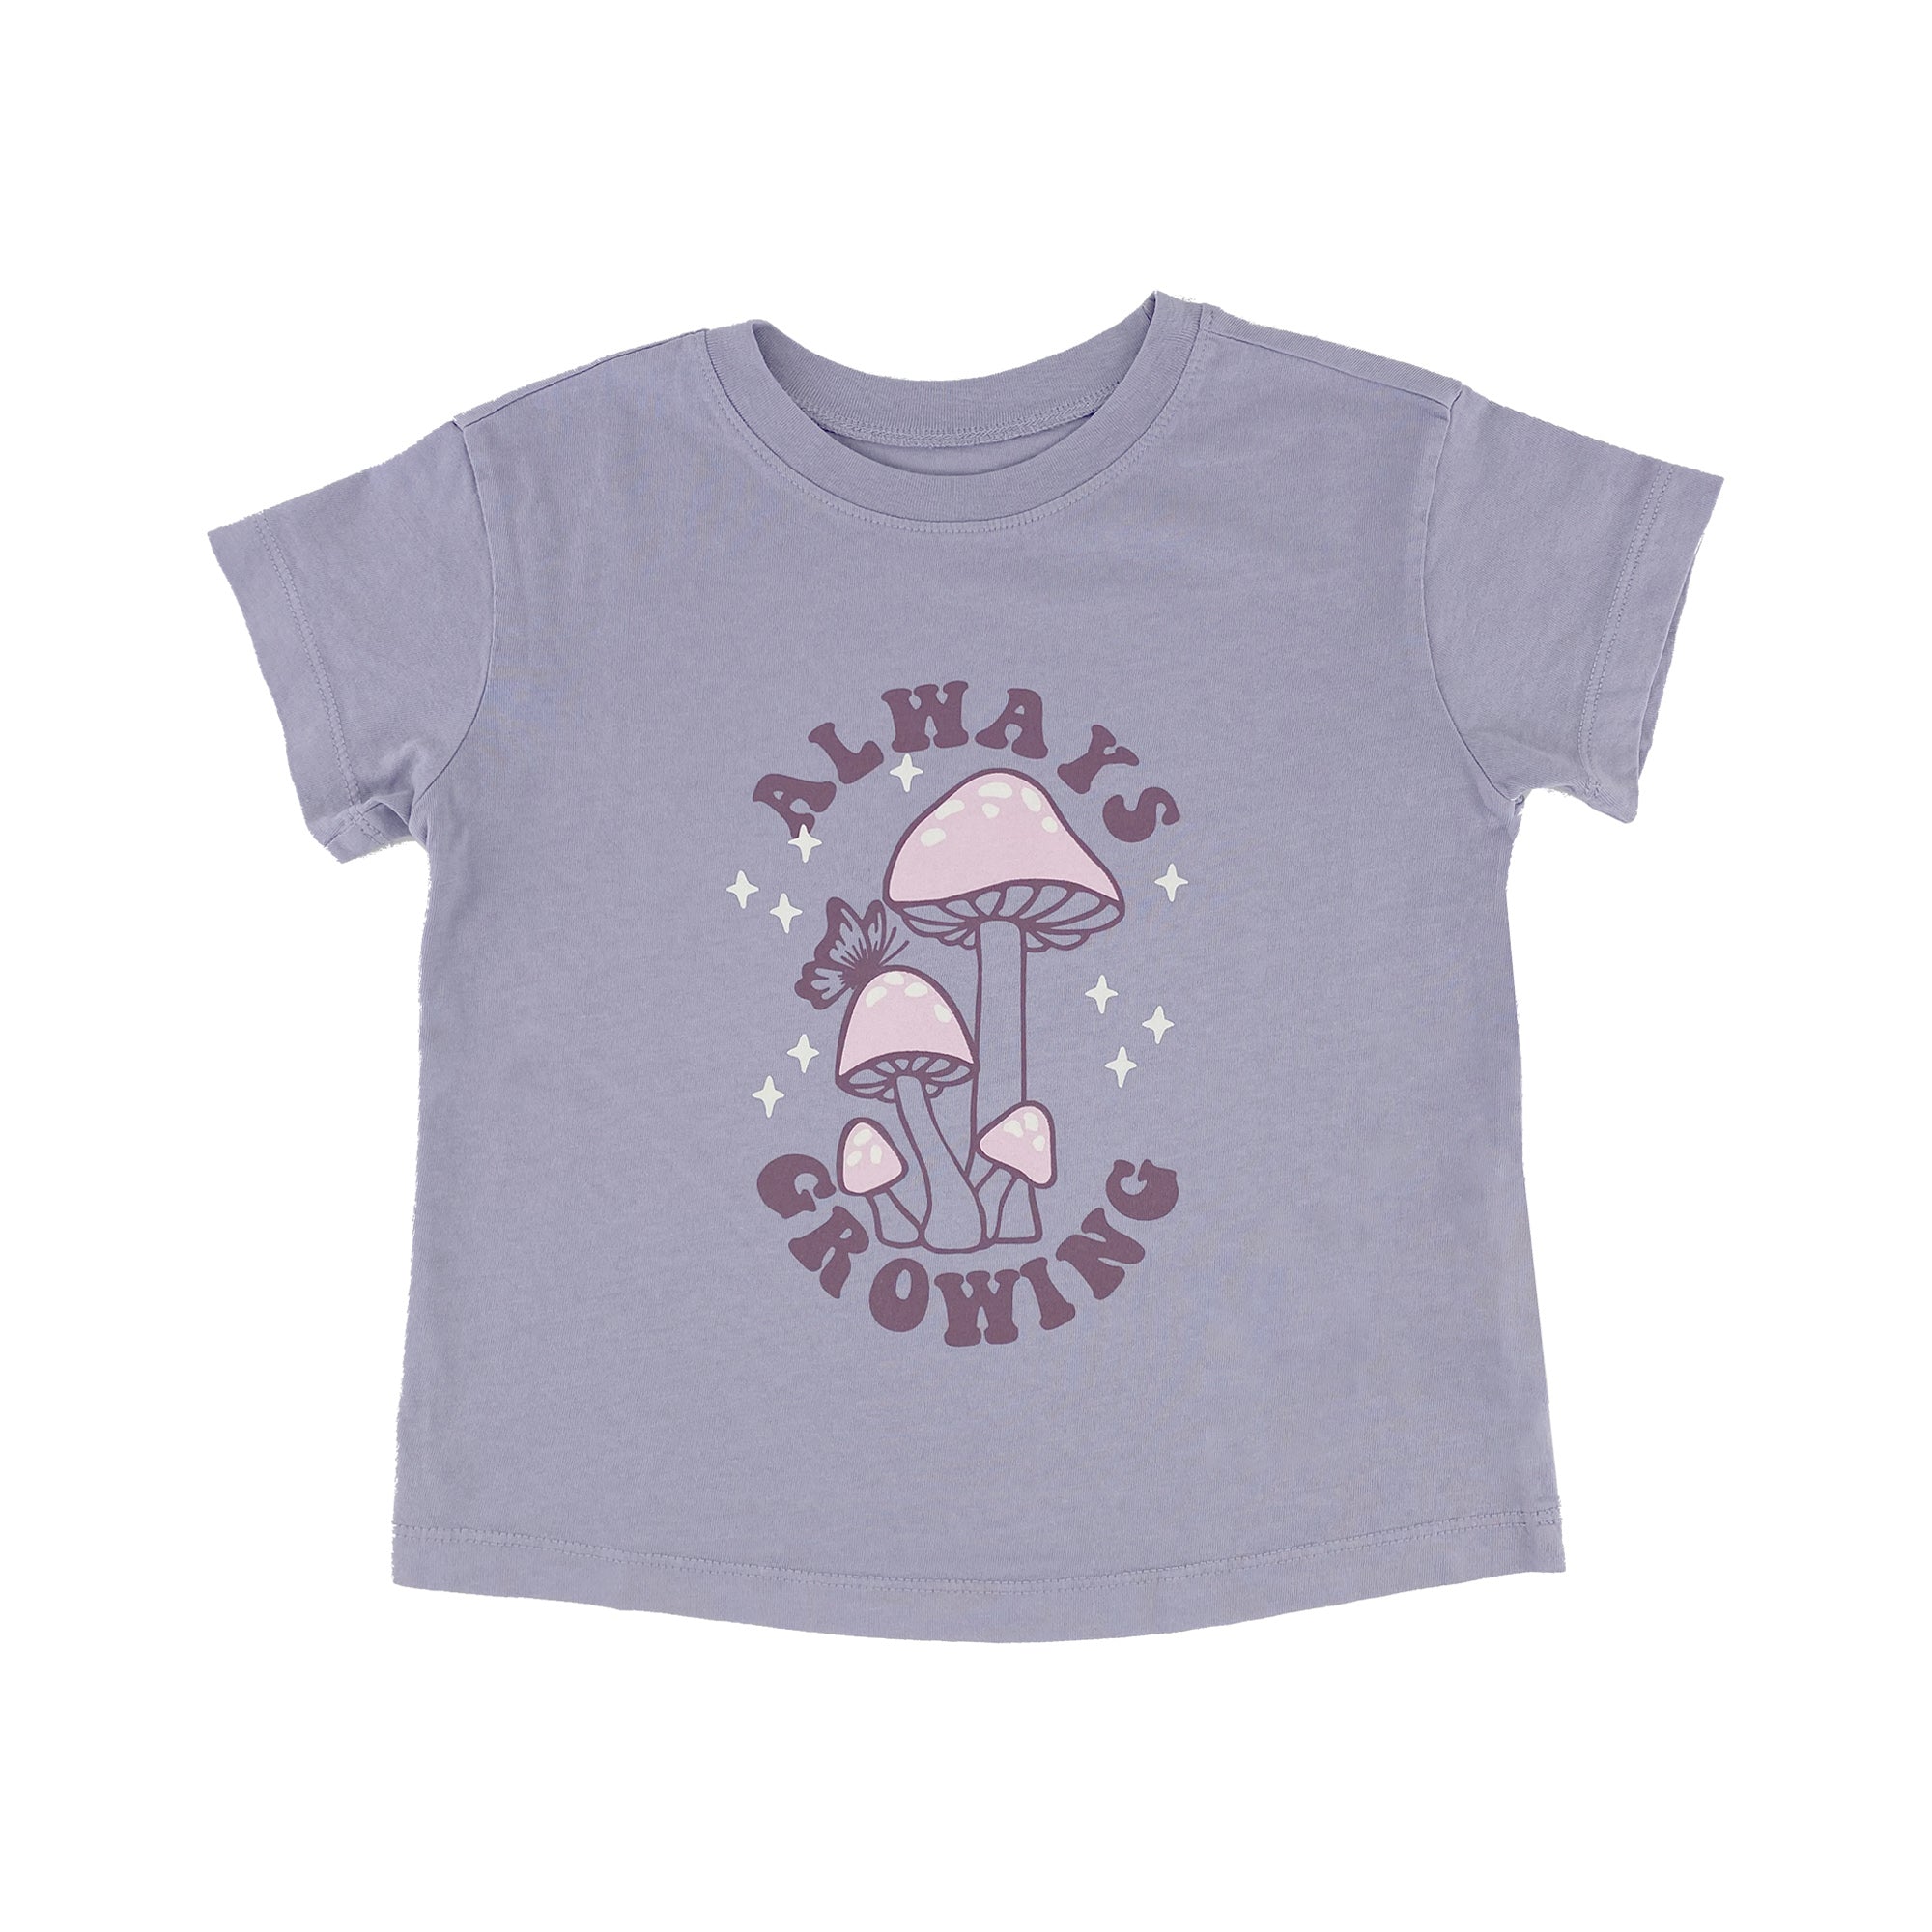 Tiny Whales_Tiny Whales Always Growing Tee_Tops